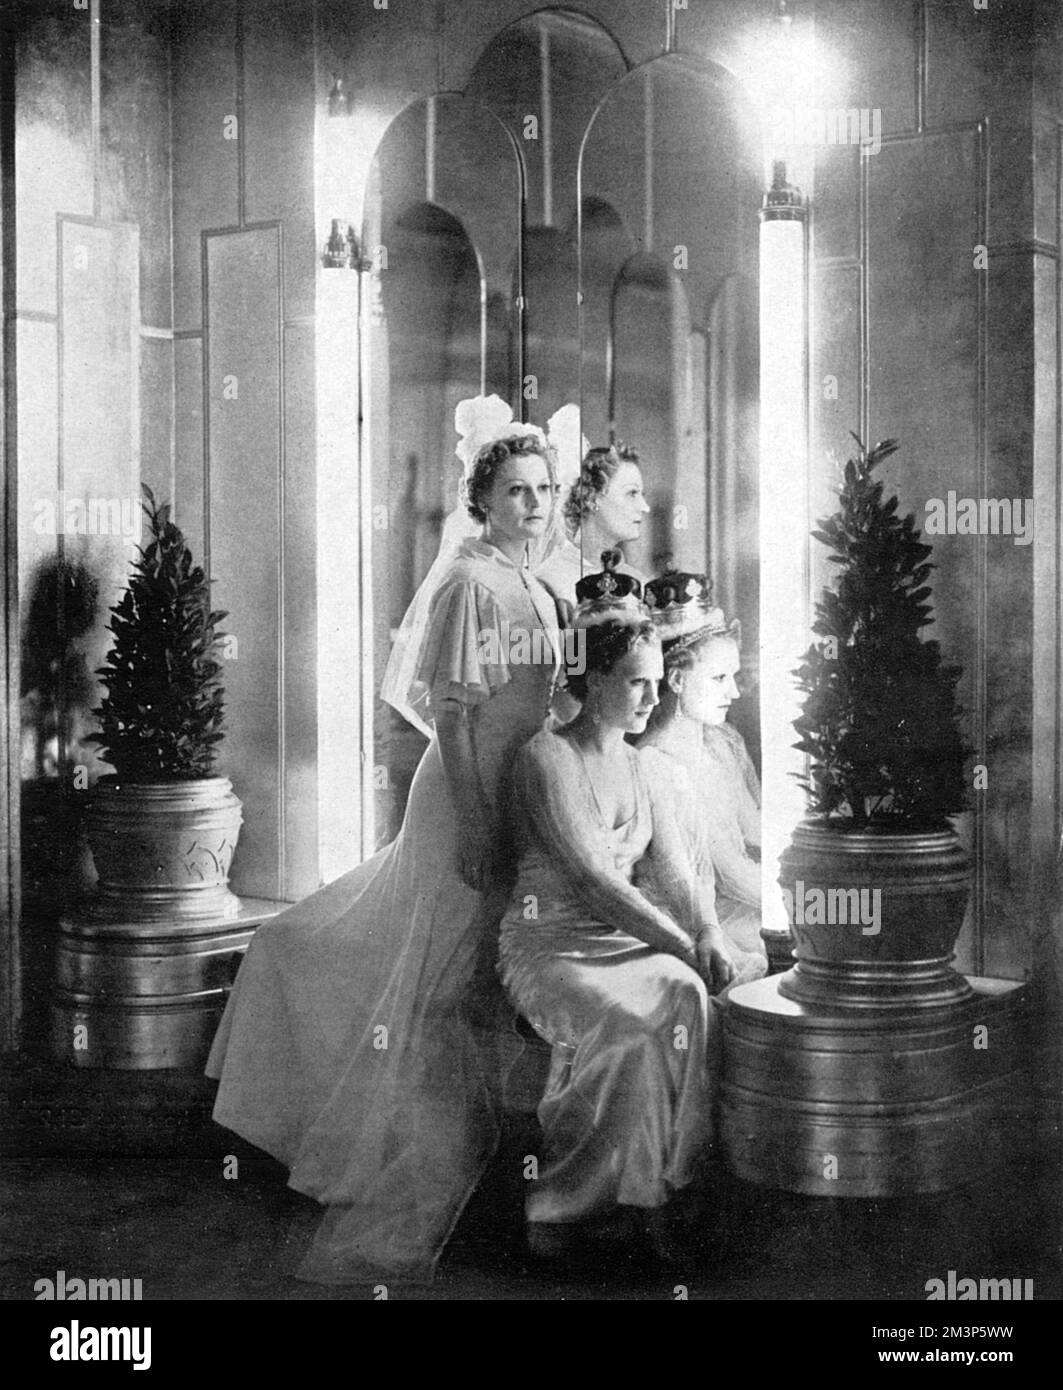 Examples of hair styles for the coming Coronation season on display at the Mayfair hotel organised by the Incorporated Guild of Hairdressers.  The coiffures in the foreground are suggested as teh most suitable for wearing with a peeress's coronet and those in the background suitable for debutantes.  Coronets were worn above light tiaras - quite a lot to fit on one's head.     Date: 1937 Stock Photo